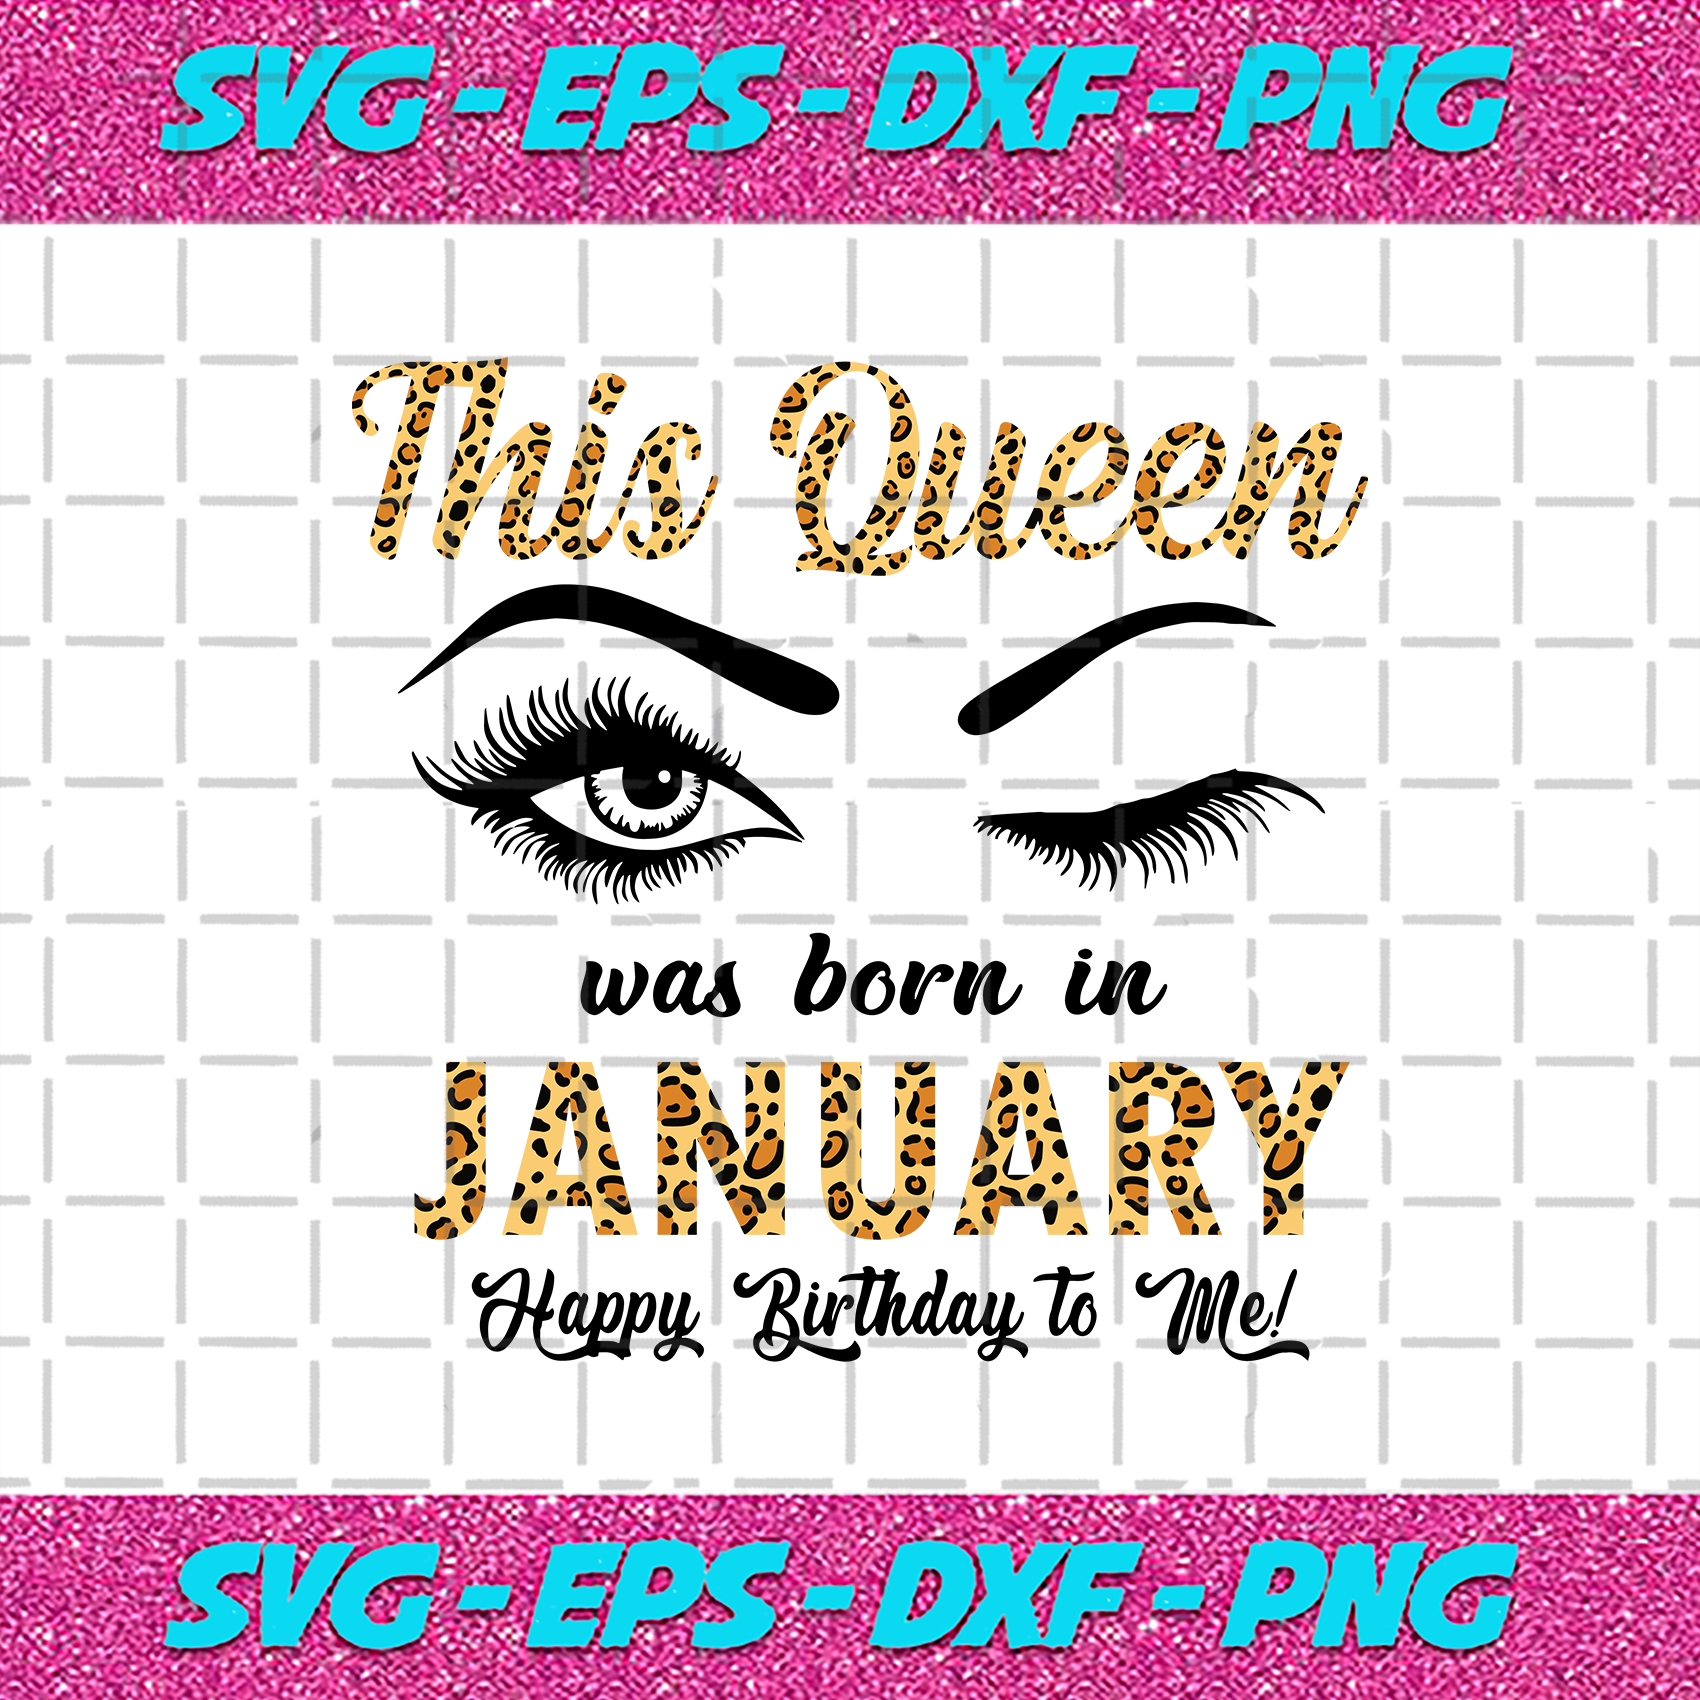 Born In January January Svg A Queen Was Born In January Svg Birthday Svg Birthday Gift January Queen Queen Svg